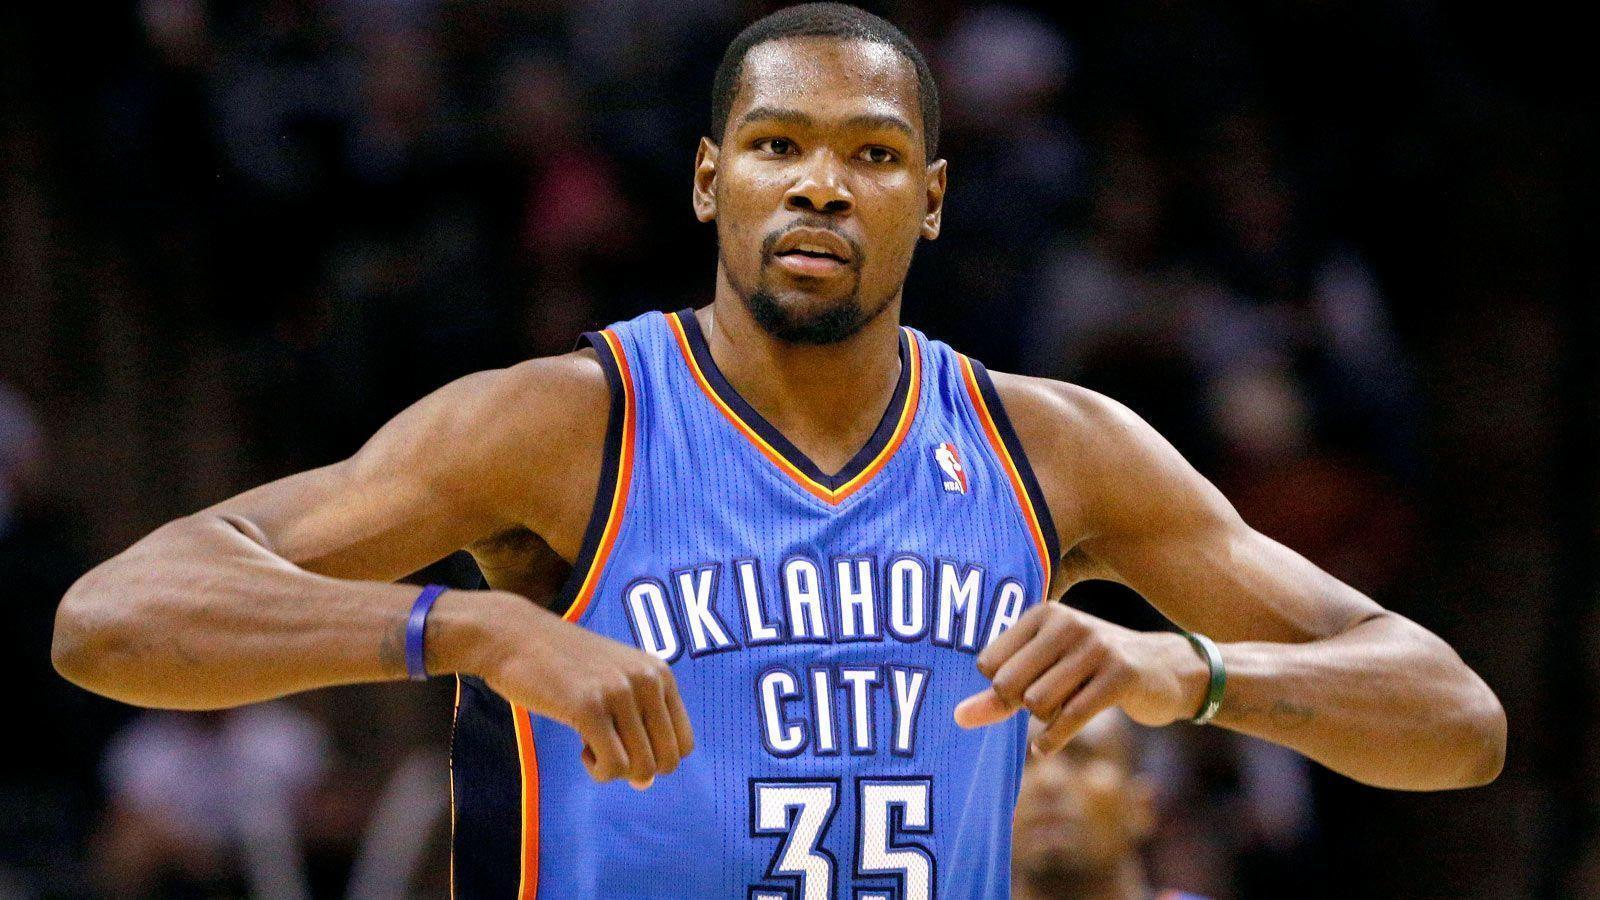 NBA free agents: Kevin Durant to sign with Golden State Warriors